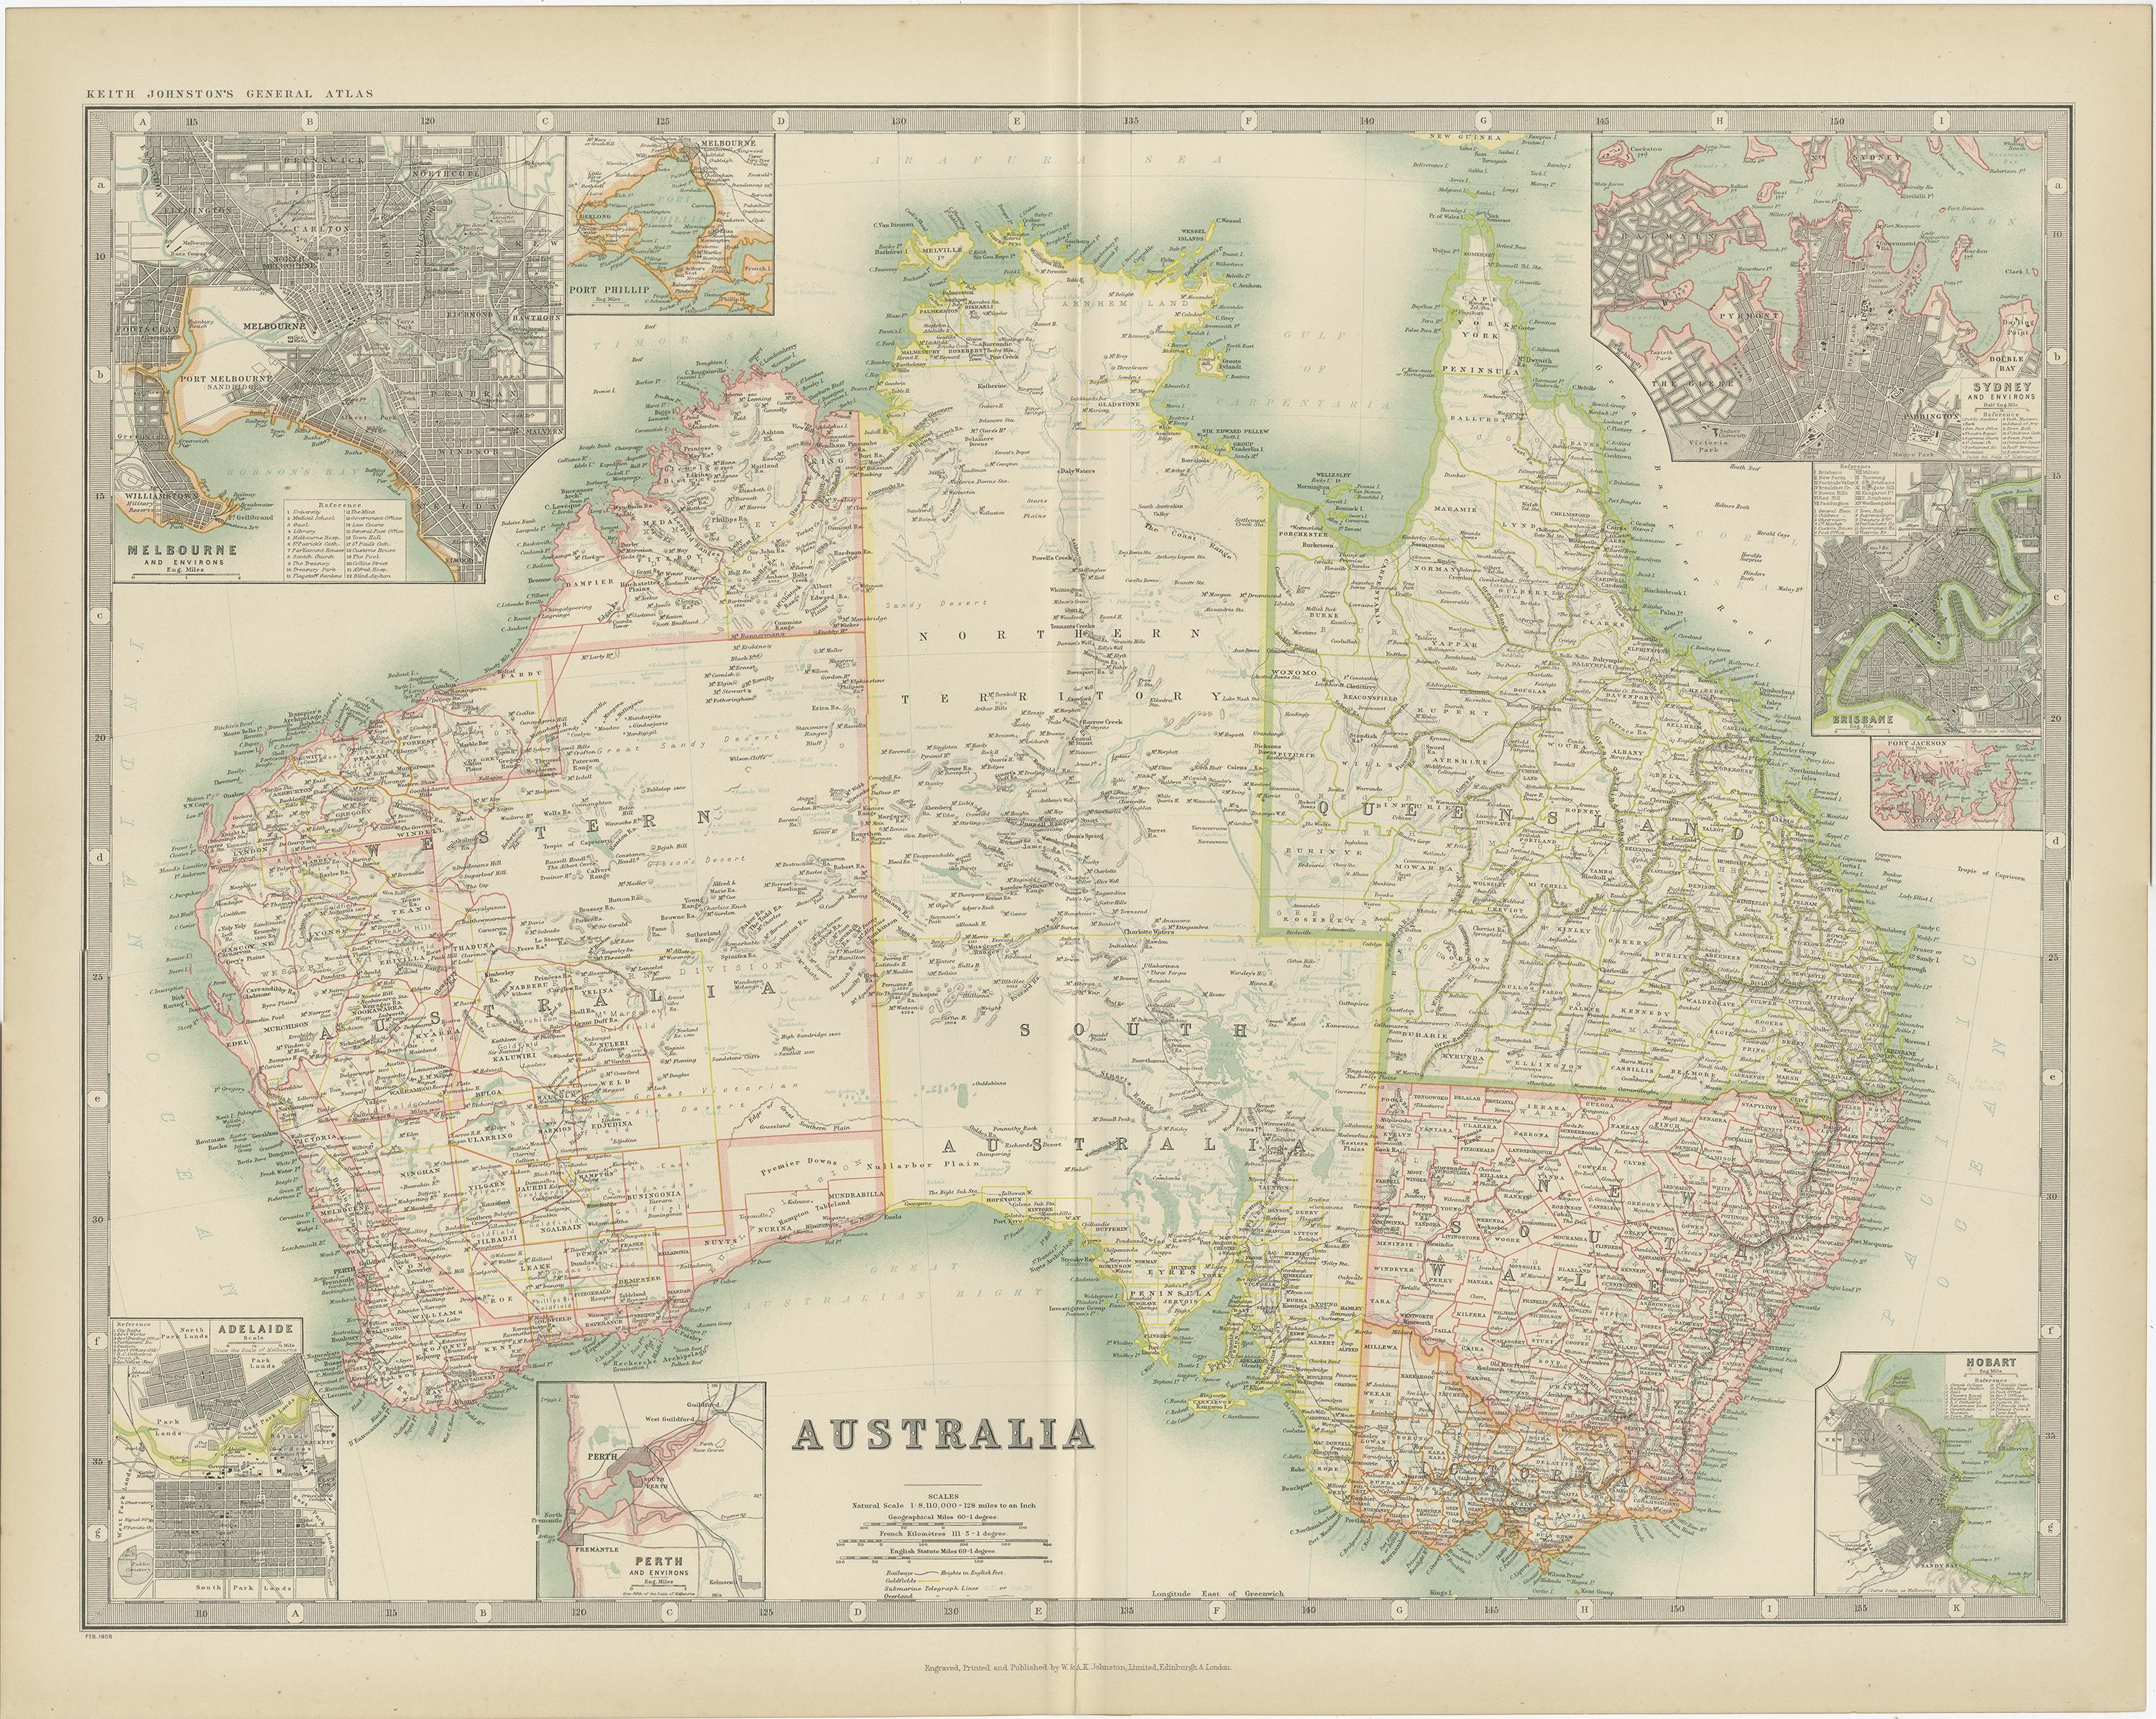 Antique map titled 'Australia'. Original antique map of Australia. With inset maps of Melbourne, Port Phillip, Adelaide, Perth, Sydney, Brisbane, Port Jackson and Hobart . This map originates from the ‘Royal Atlas of Modern Geography’. Published by